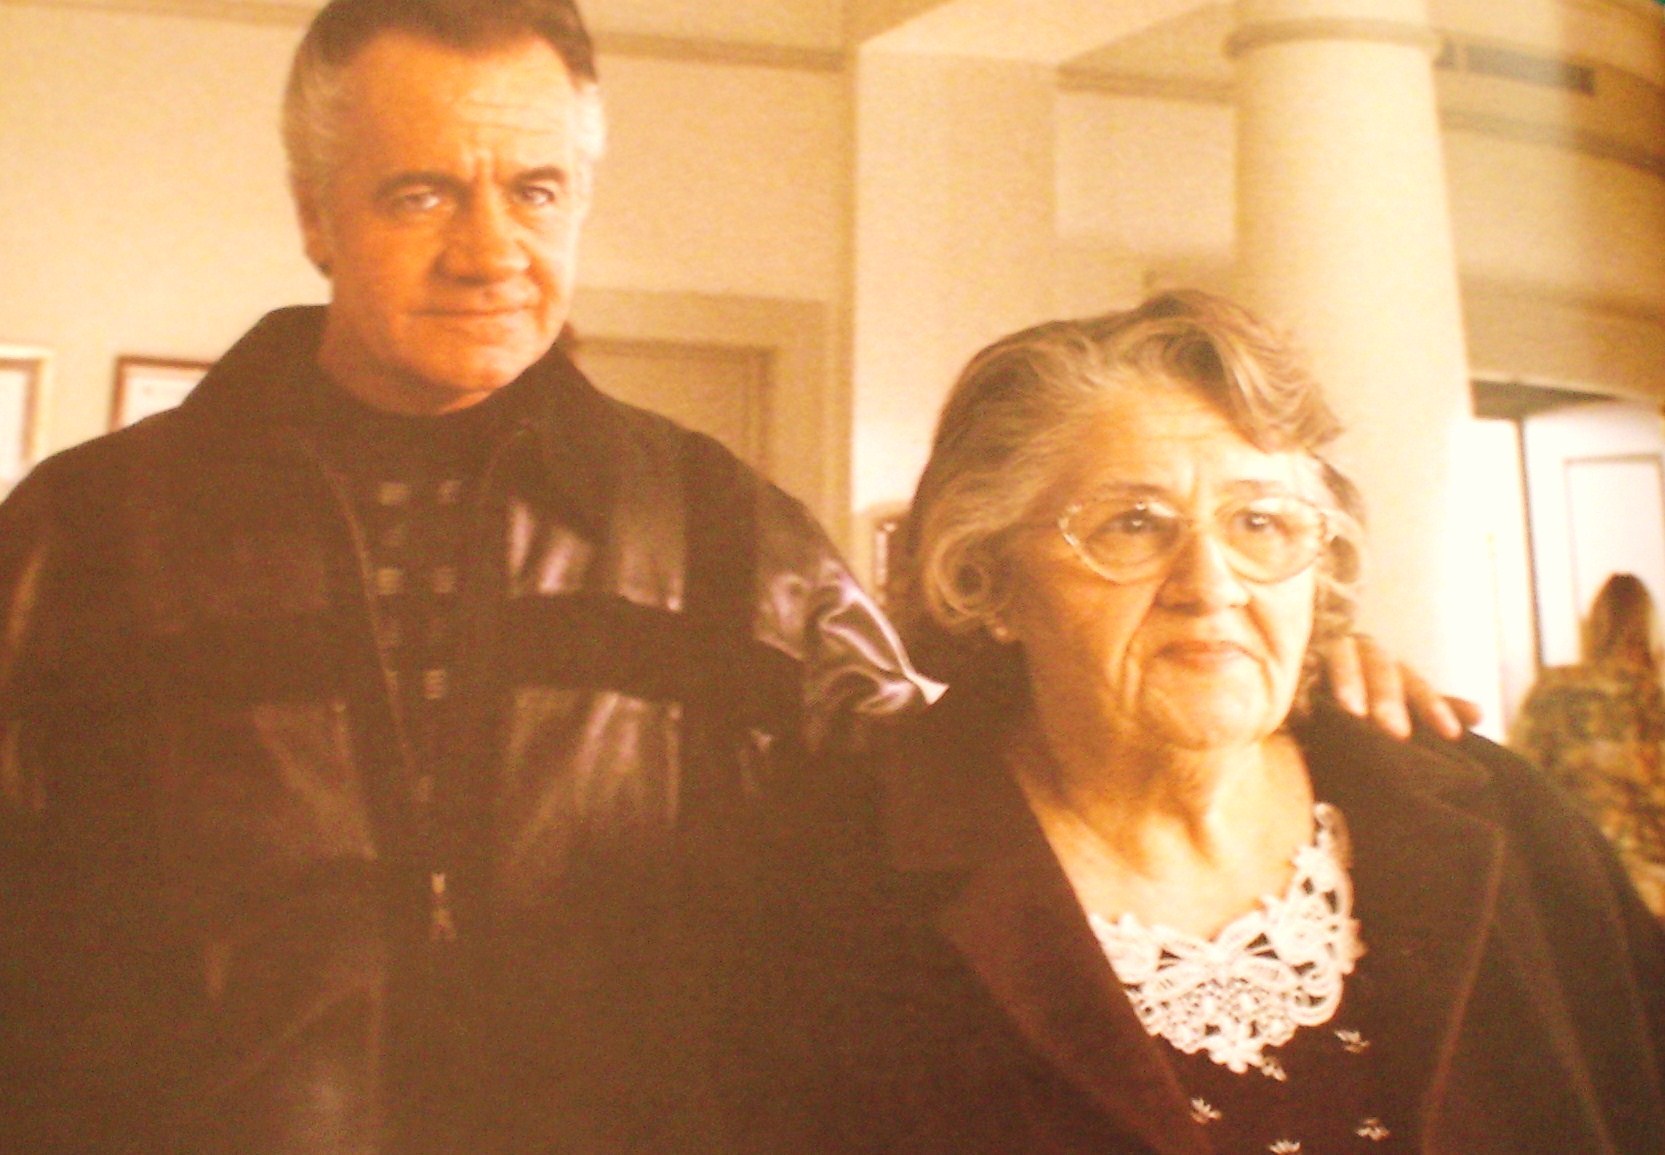 Paulie And His Mother - Paulie Walnuts And His Mom - HD Wallpaper 